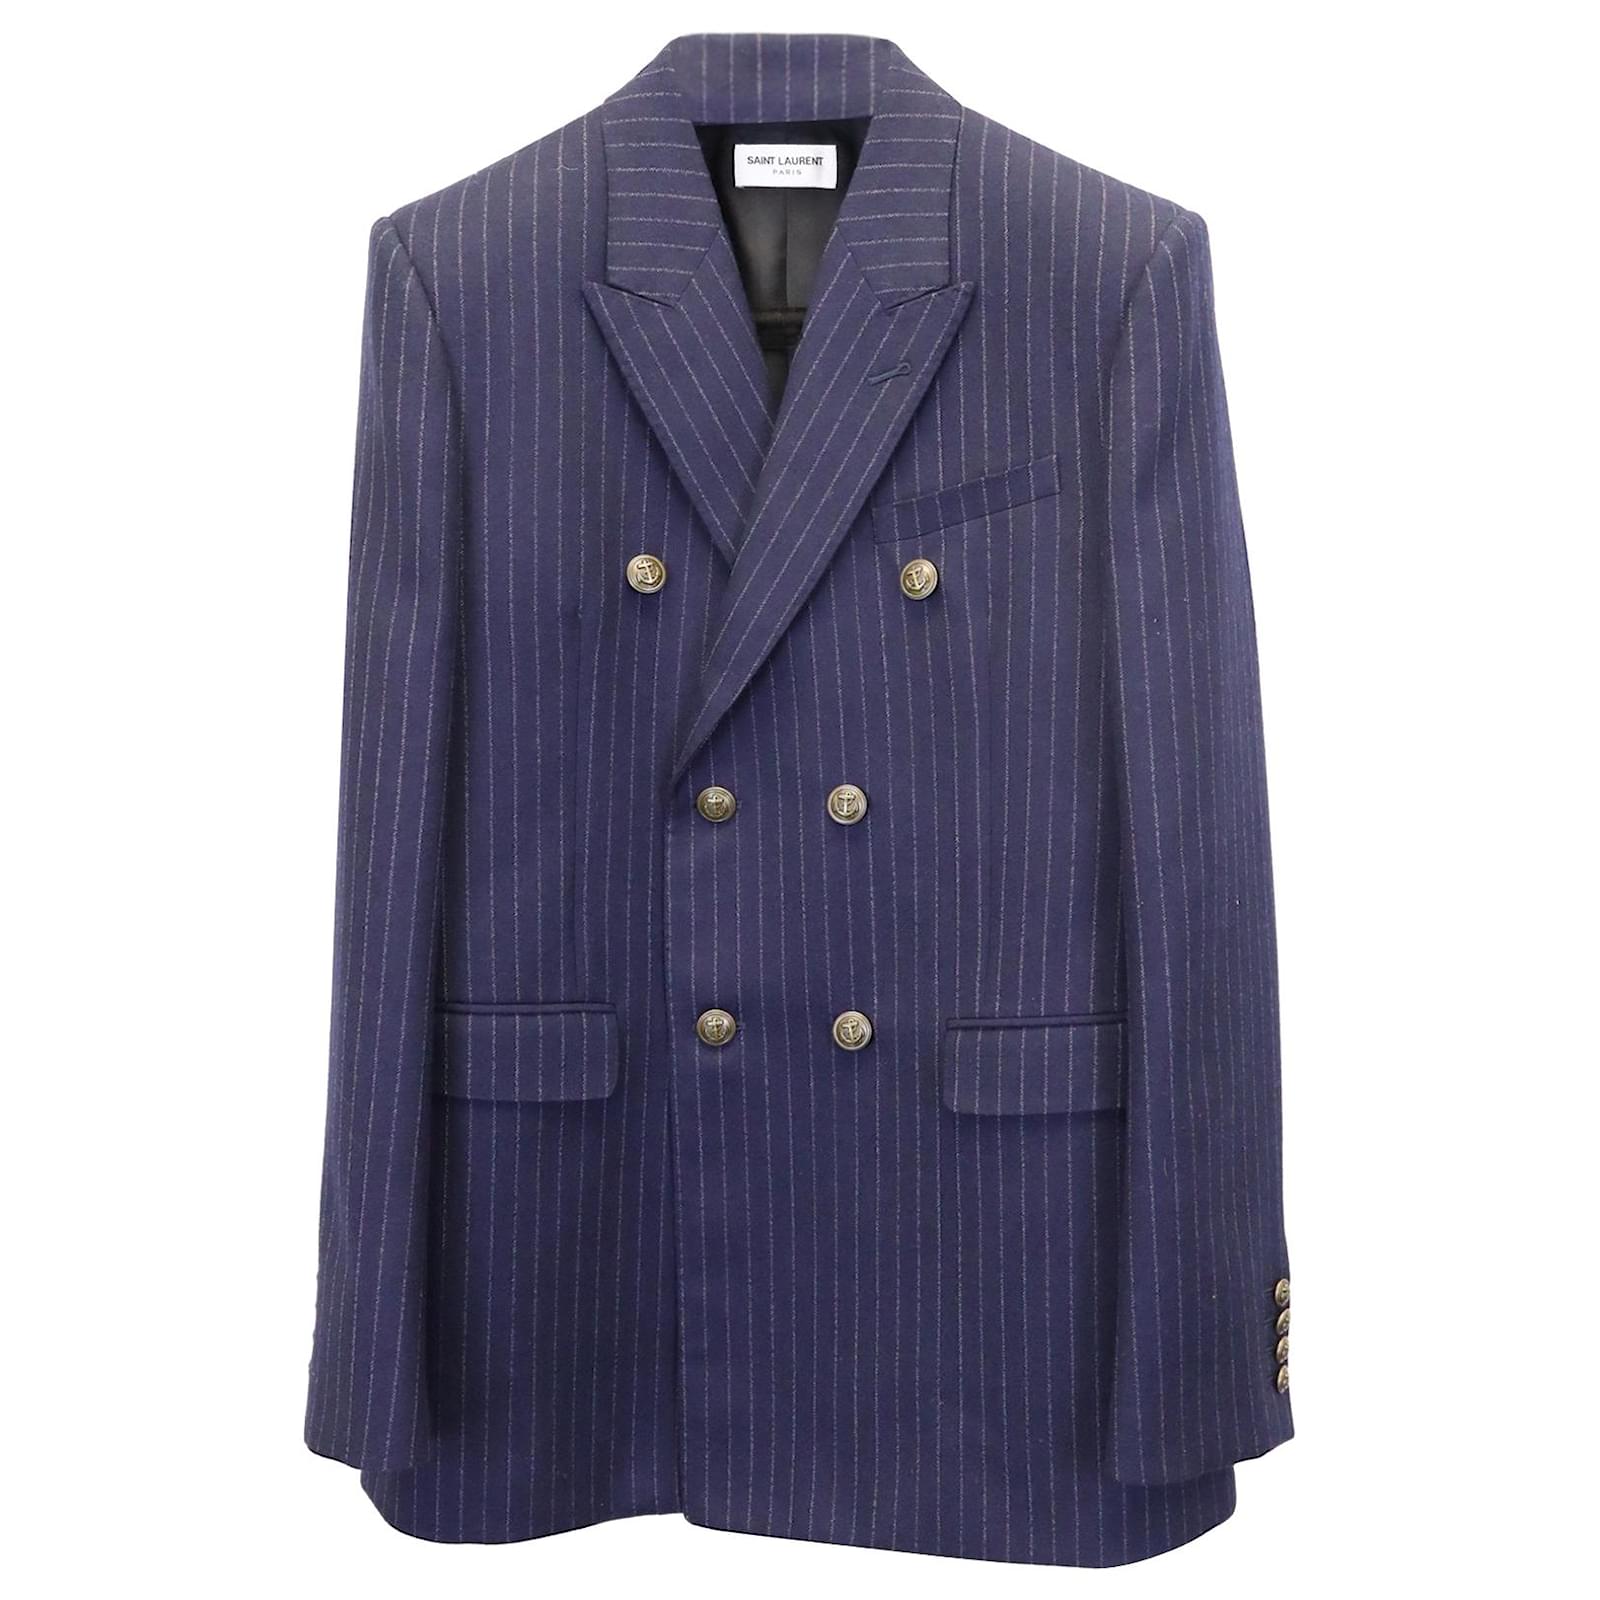 Saint Laurent Double Breasted Striped Jacket in Navy Blue Wool ref